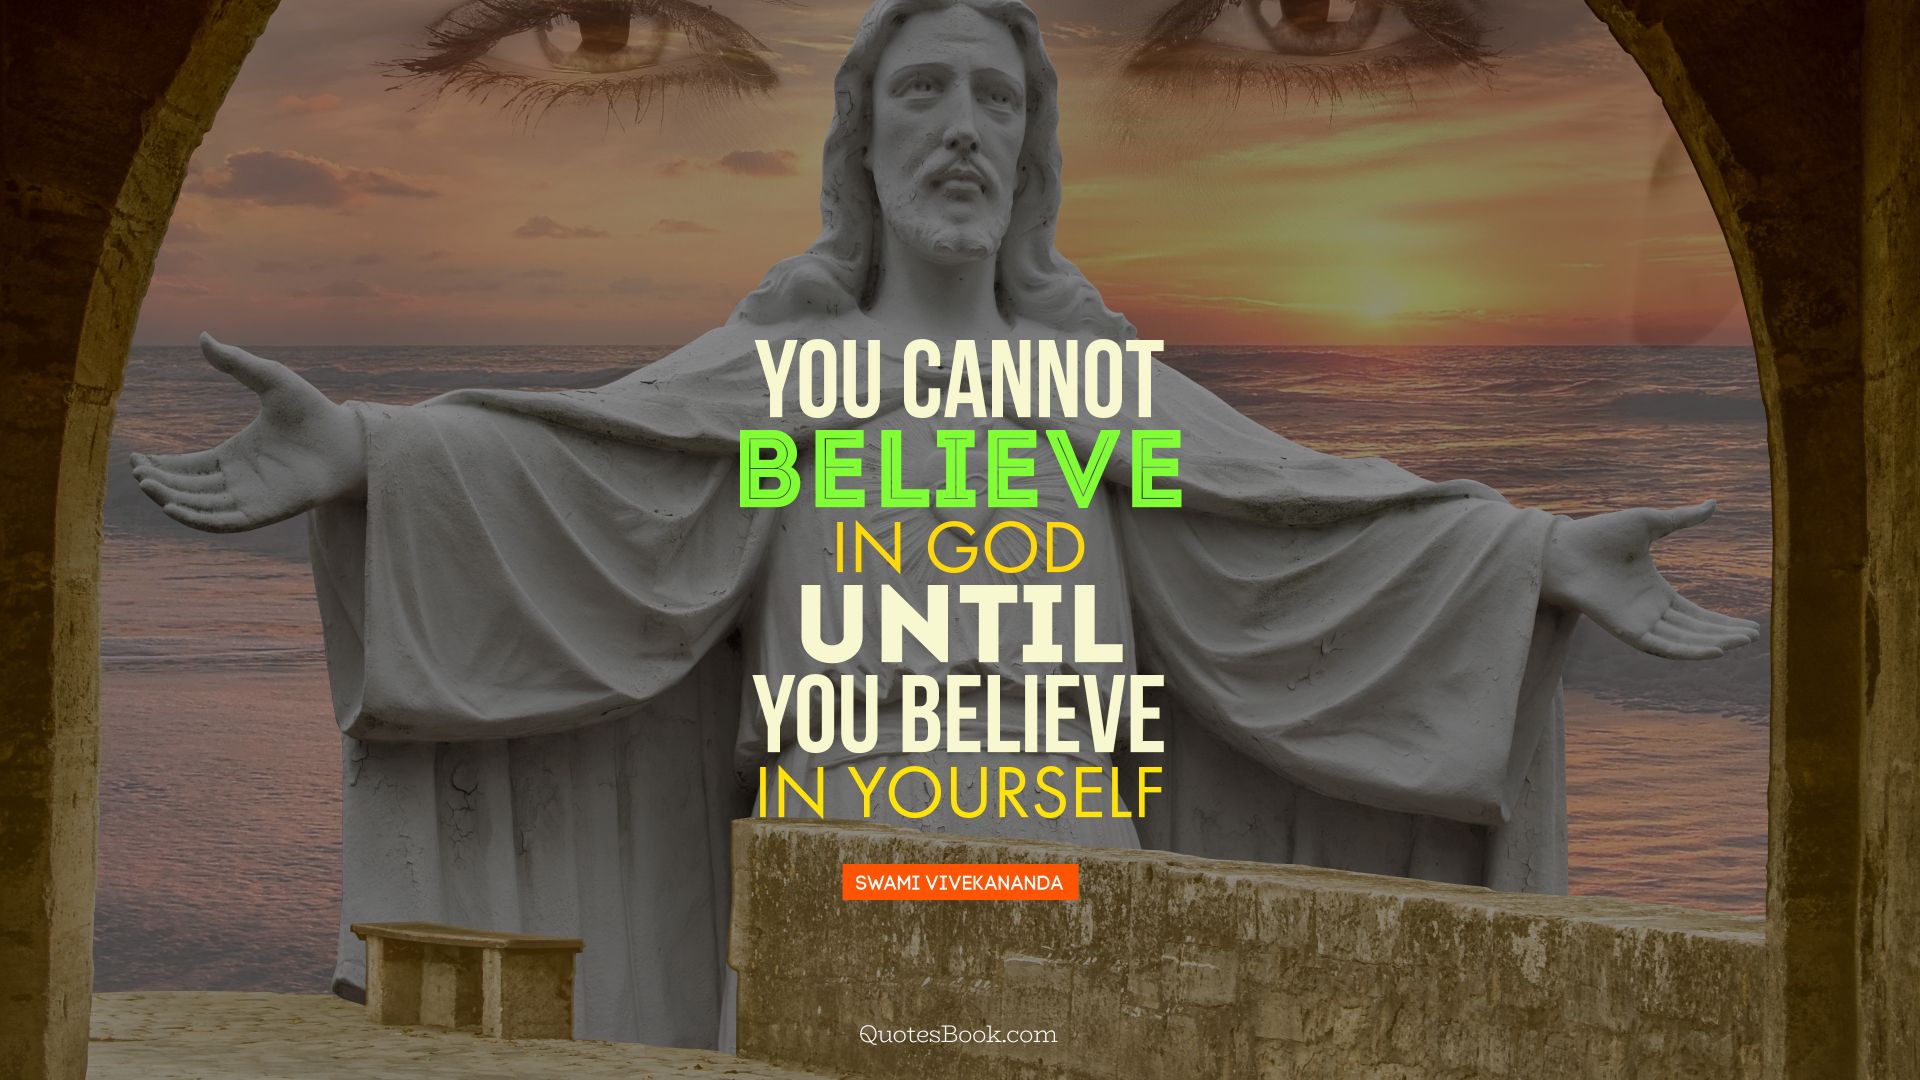 You cannot believe  in God until you believe in yourself. - Quote by Swami Vivekananda